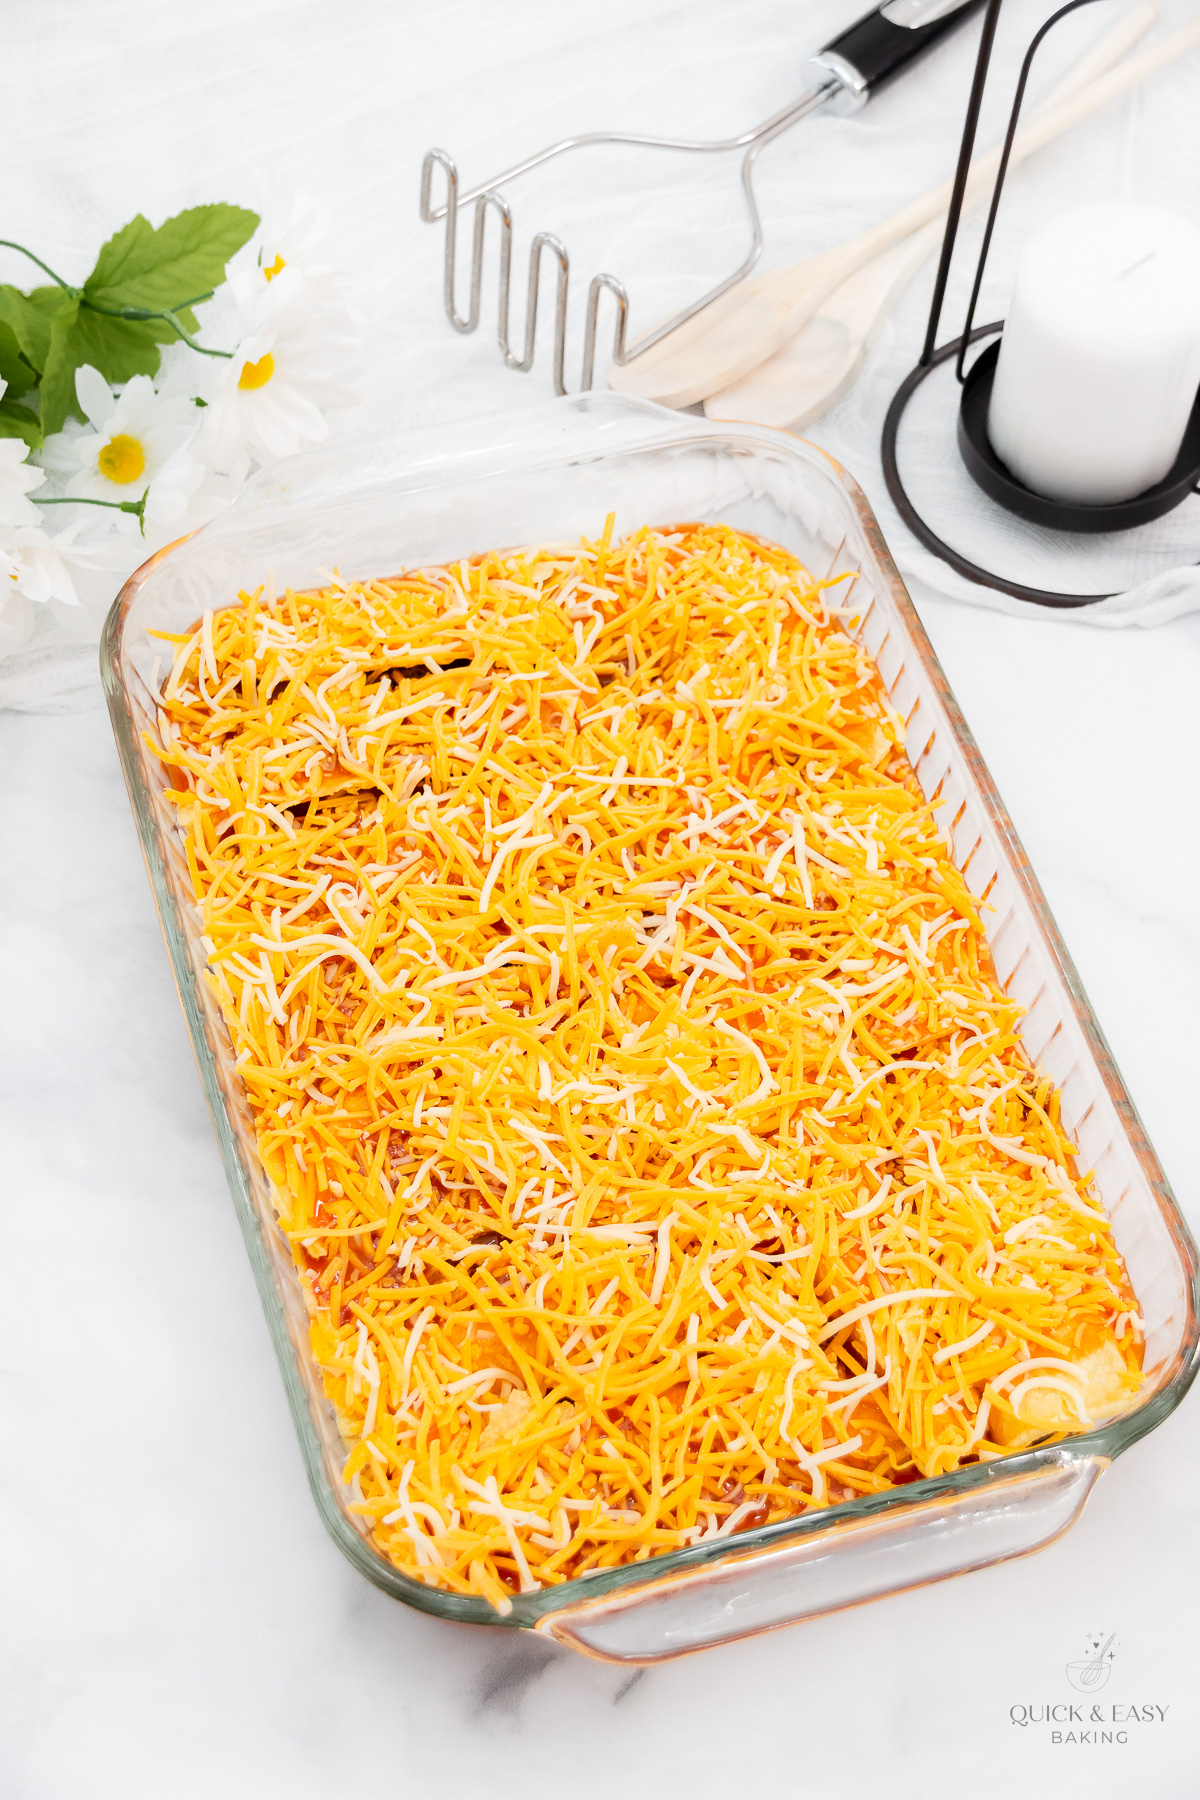 Shredded cheddar cheese covering a baking dish with enchiladas in it.